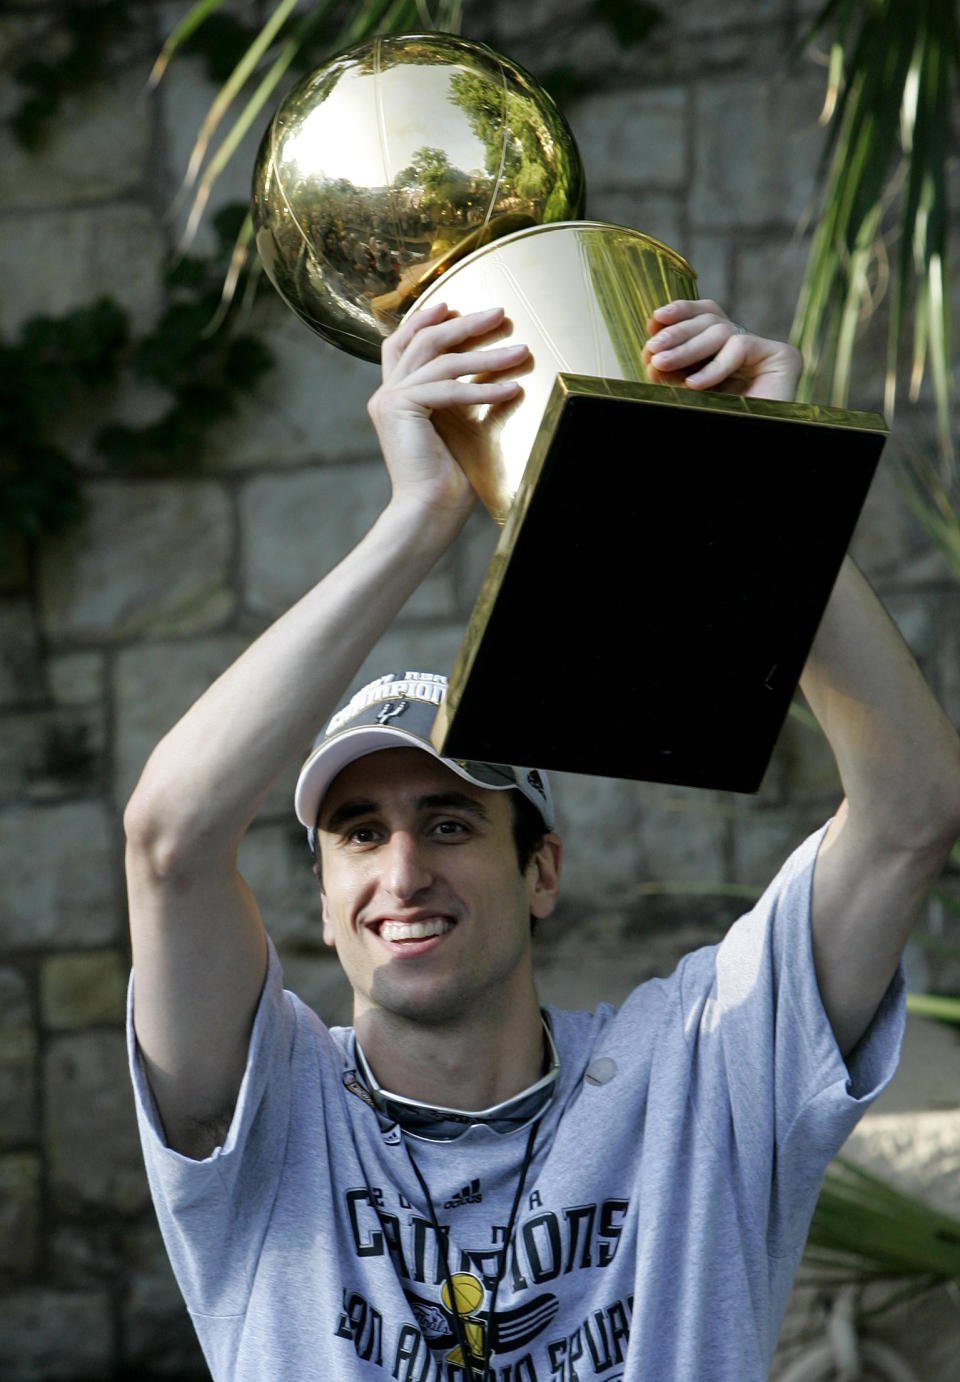 FILE - In this June 17, 2007, file photo, San Antonio Spurs guard Manu Ginobili, of Argentina, holds the Larry O'Brien Championship Trophy as he and teammates take part in a river parade to celebrate winning the NBA Basketball Championship, in San Antonio. Ginobili retired at age 41 Monday, Aug. 27, 2018, after a "fabulous journey" in which he helped the Spurs win four NBA championships in 16 seasons with the club. (AP Photo/Eric Gay, File)